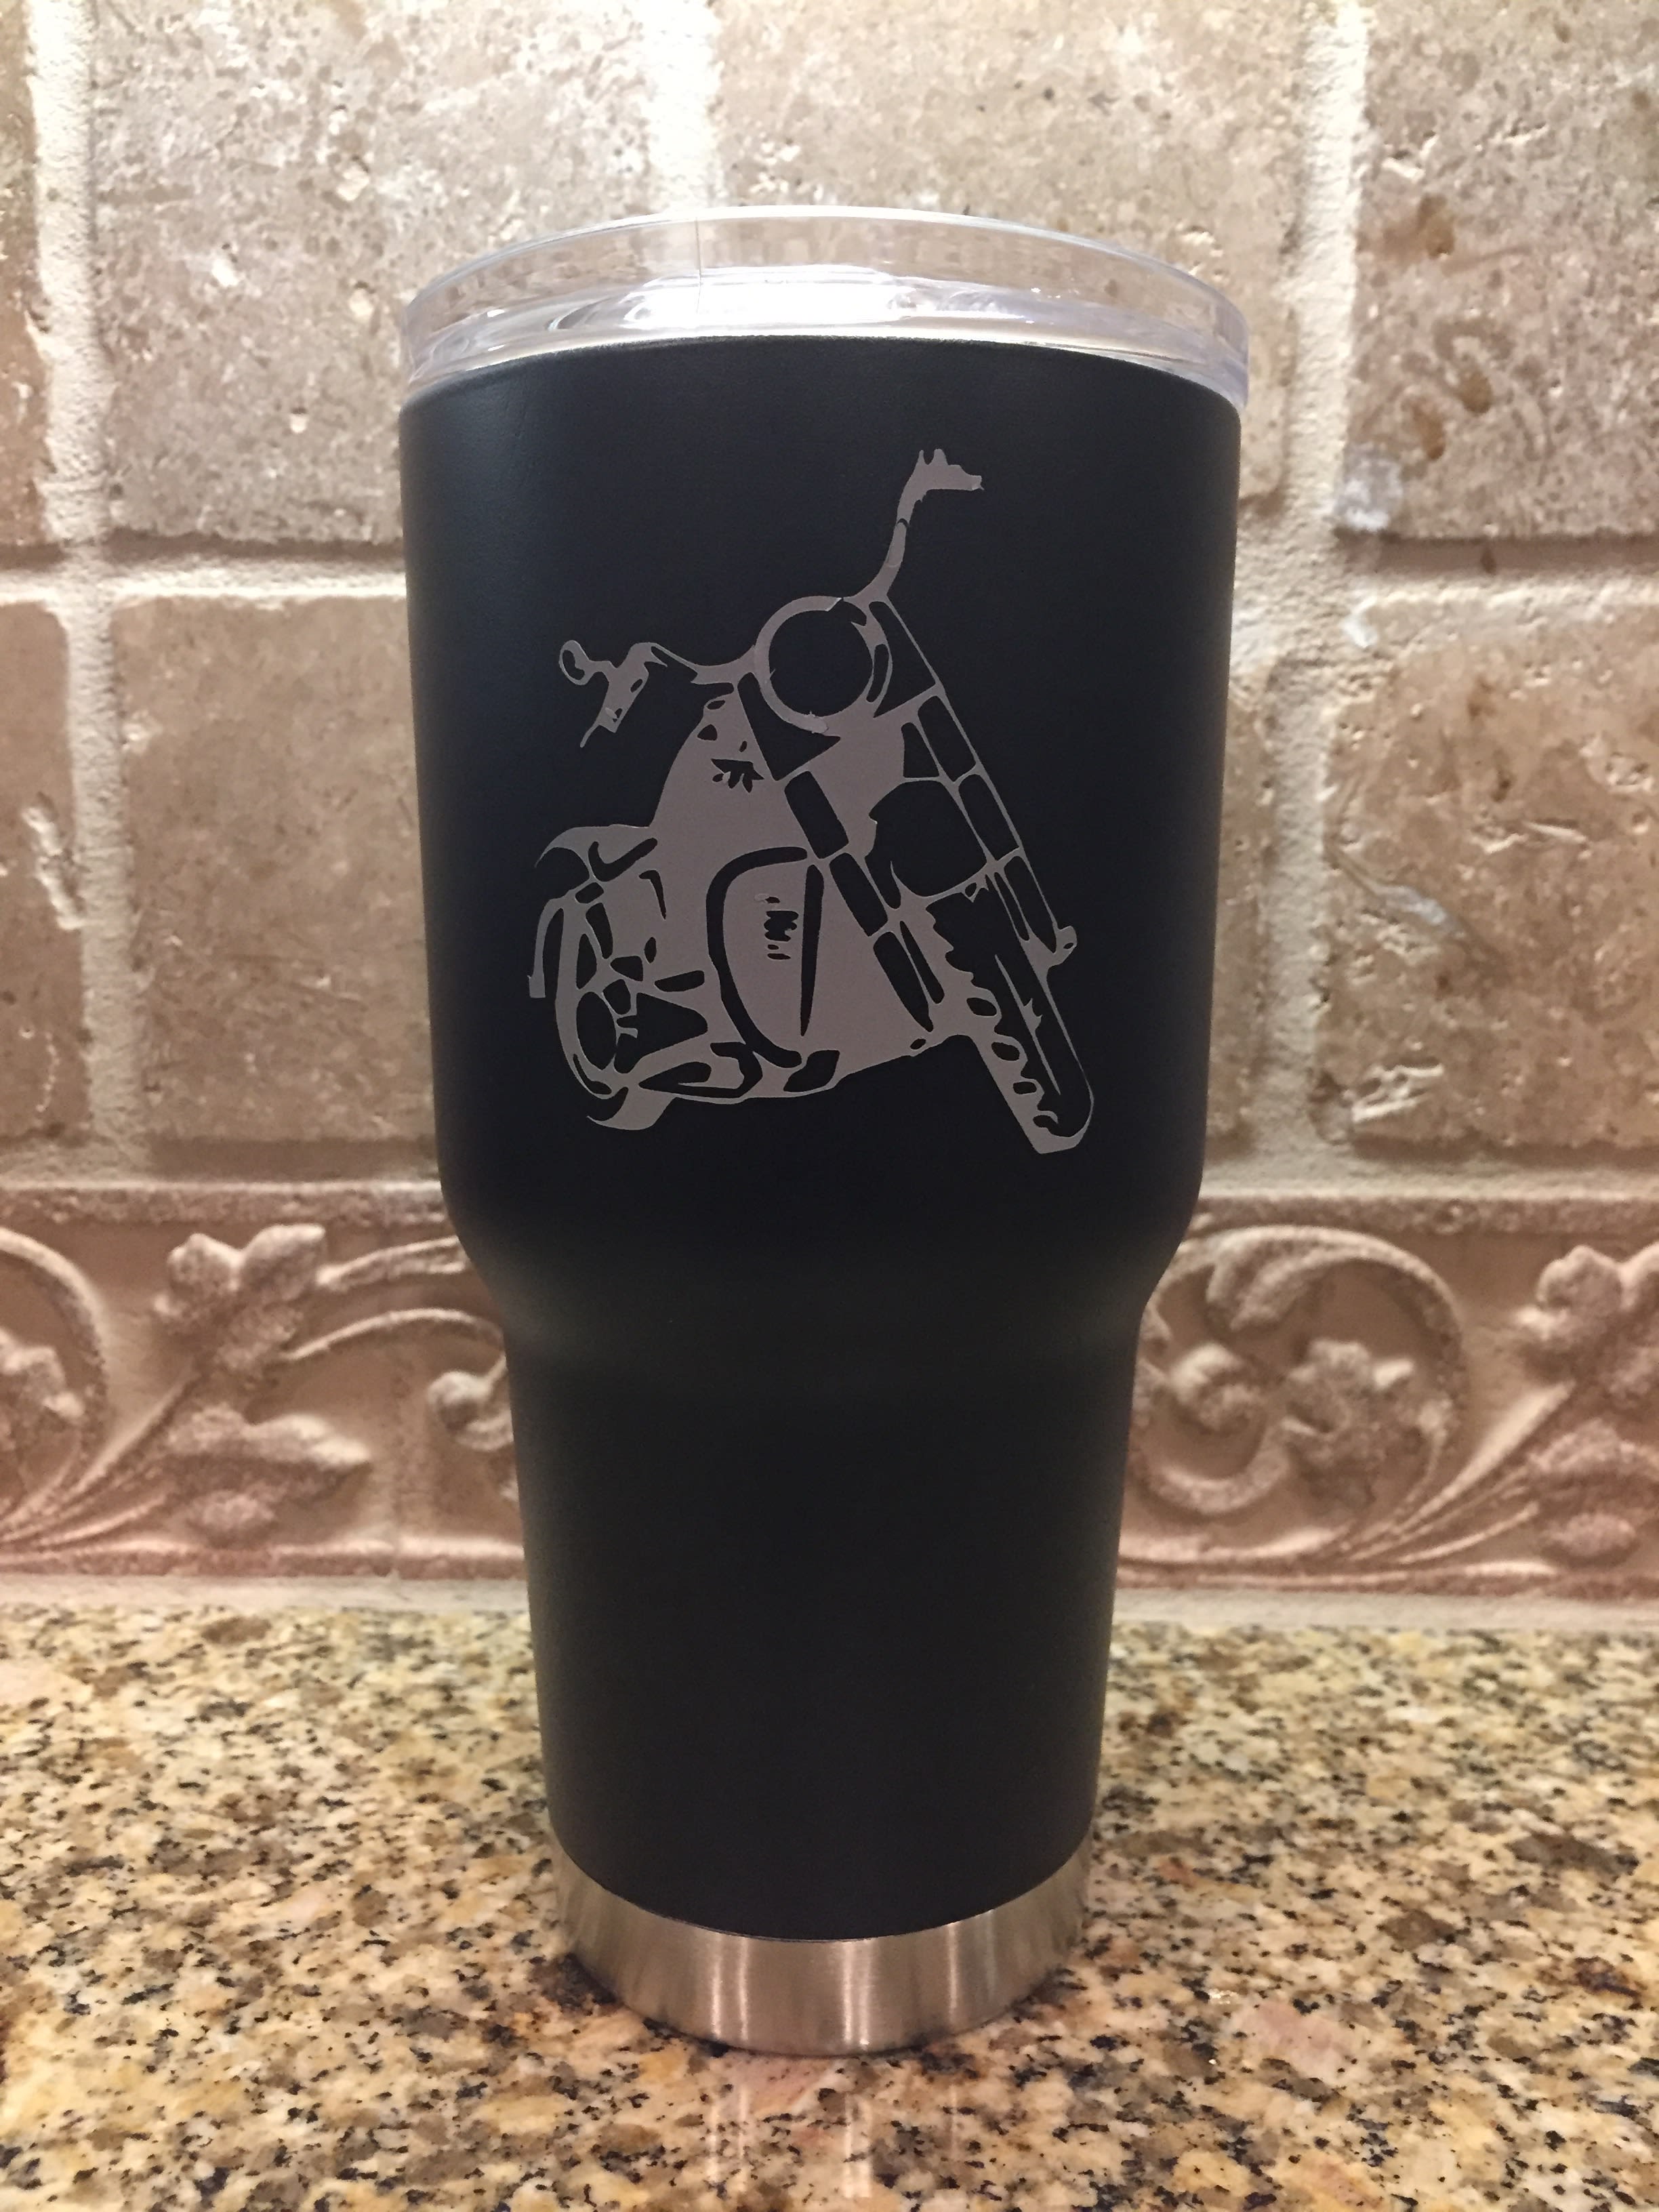 40 Oz. RTIC TUMBLER Personalized With Laser Engraved Name Phrase or Custom  Design Available in Black, Navy, or Graphite 